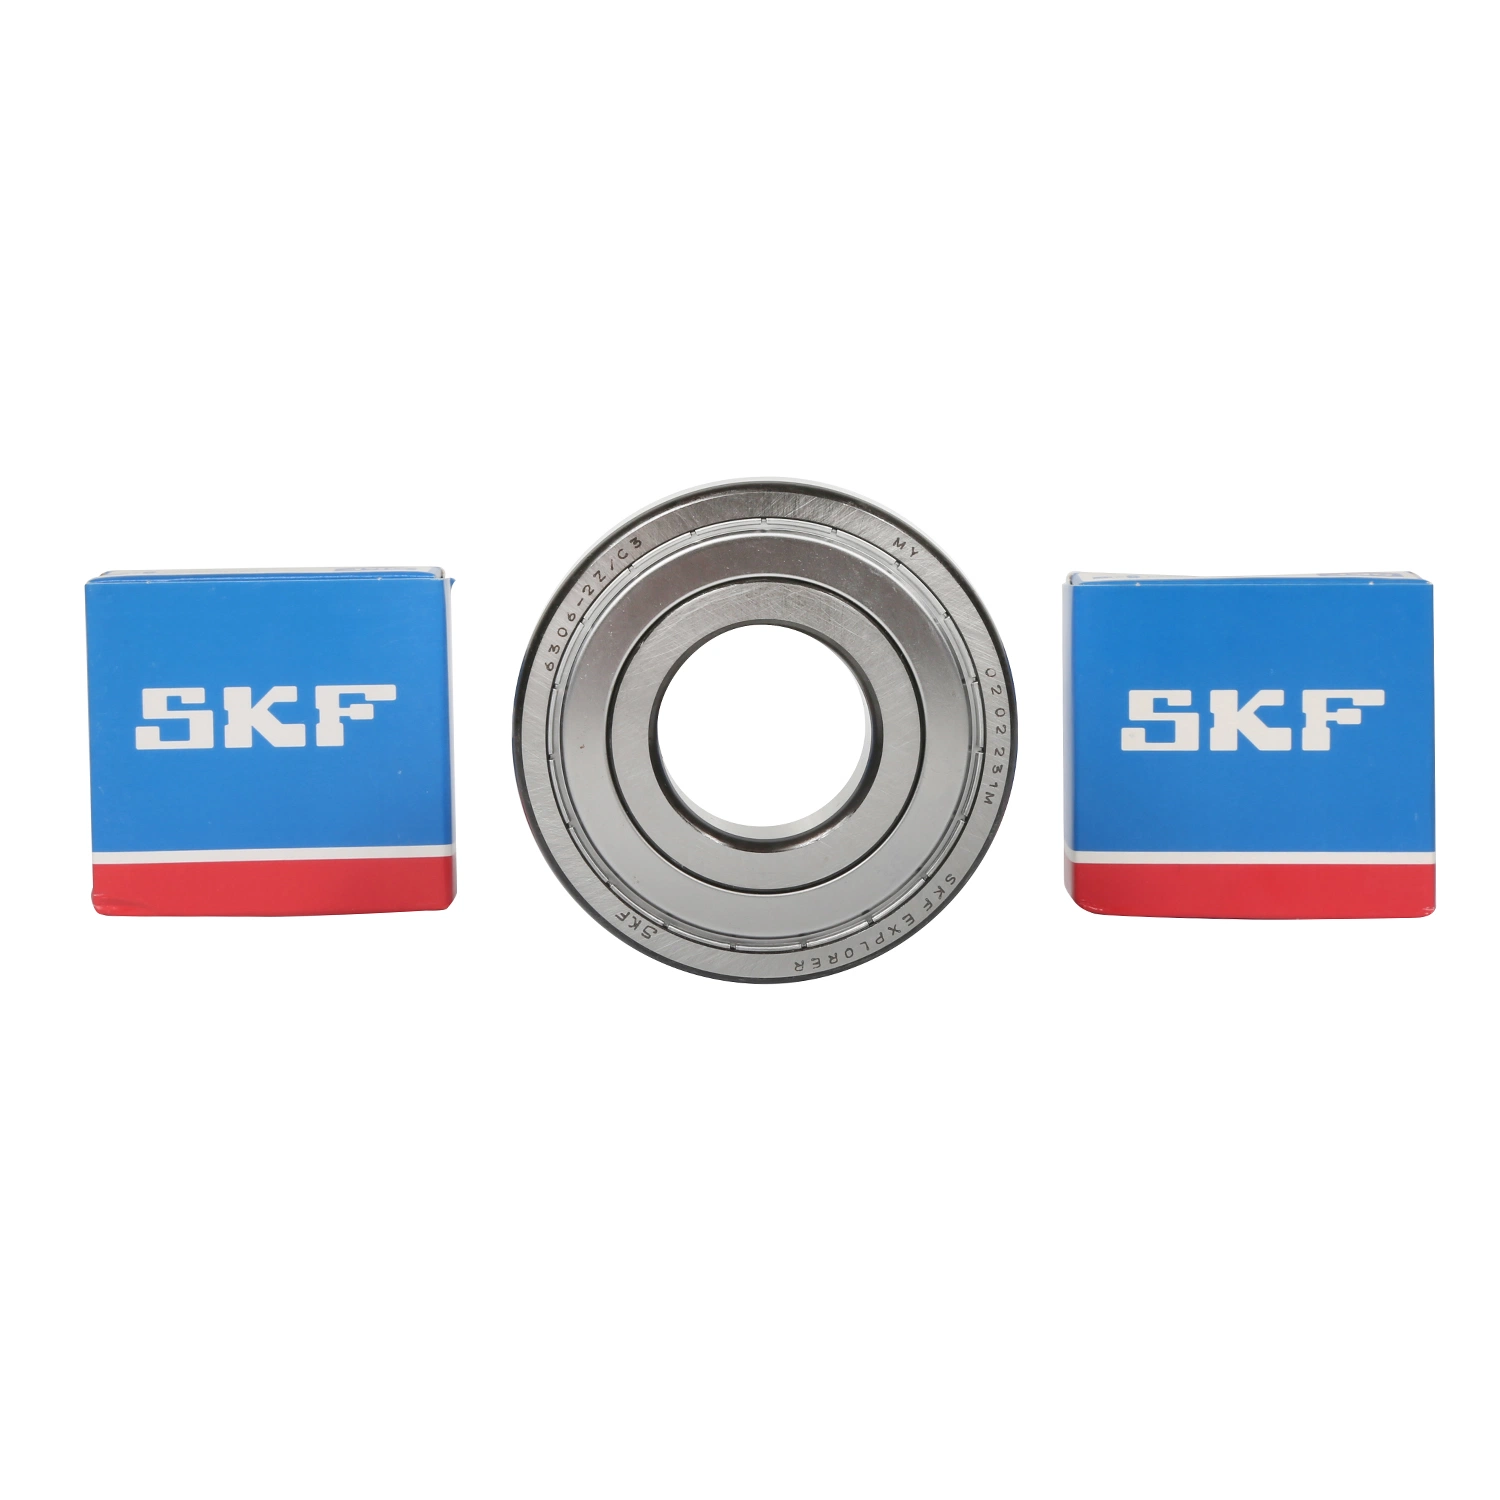 High-Quality Deep Groove Ball Bearing for Auto/Agriculture/Industrial/Machinery Parts (6006-2Z/C3, 6006-2RSH, 6006-2Z)